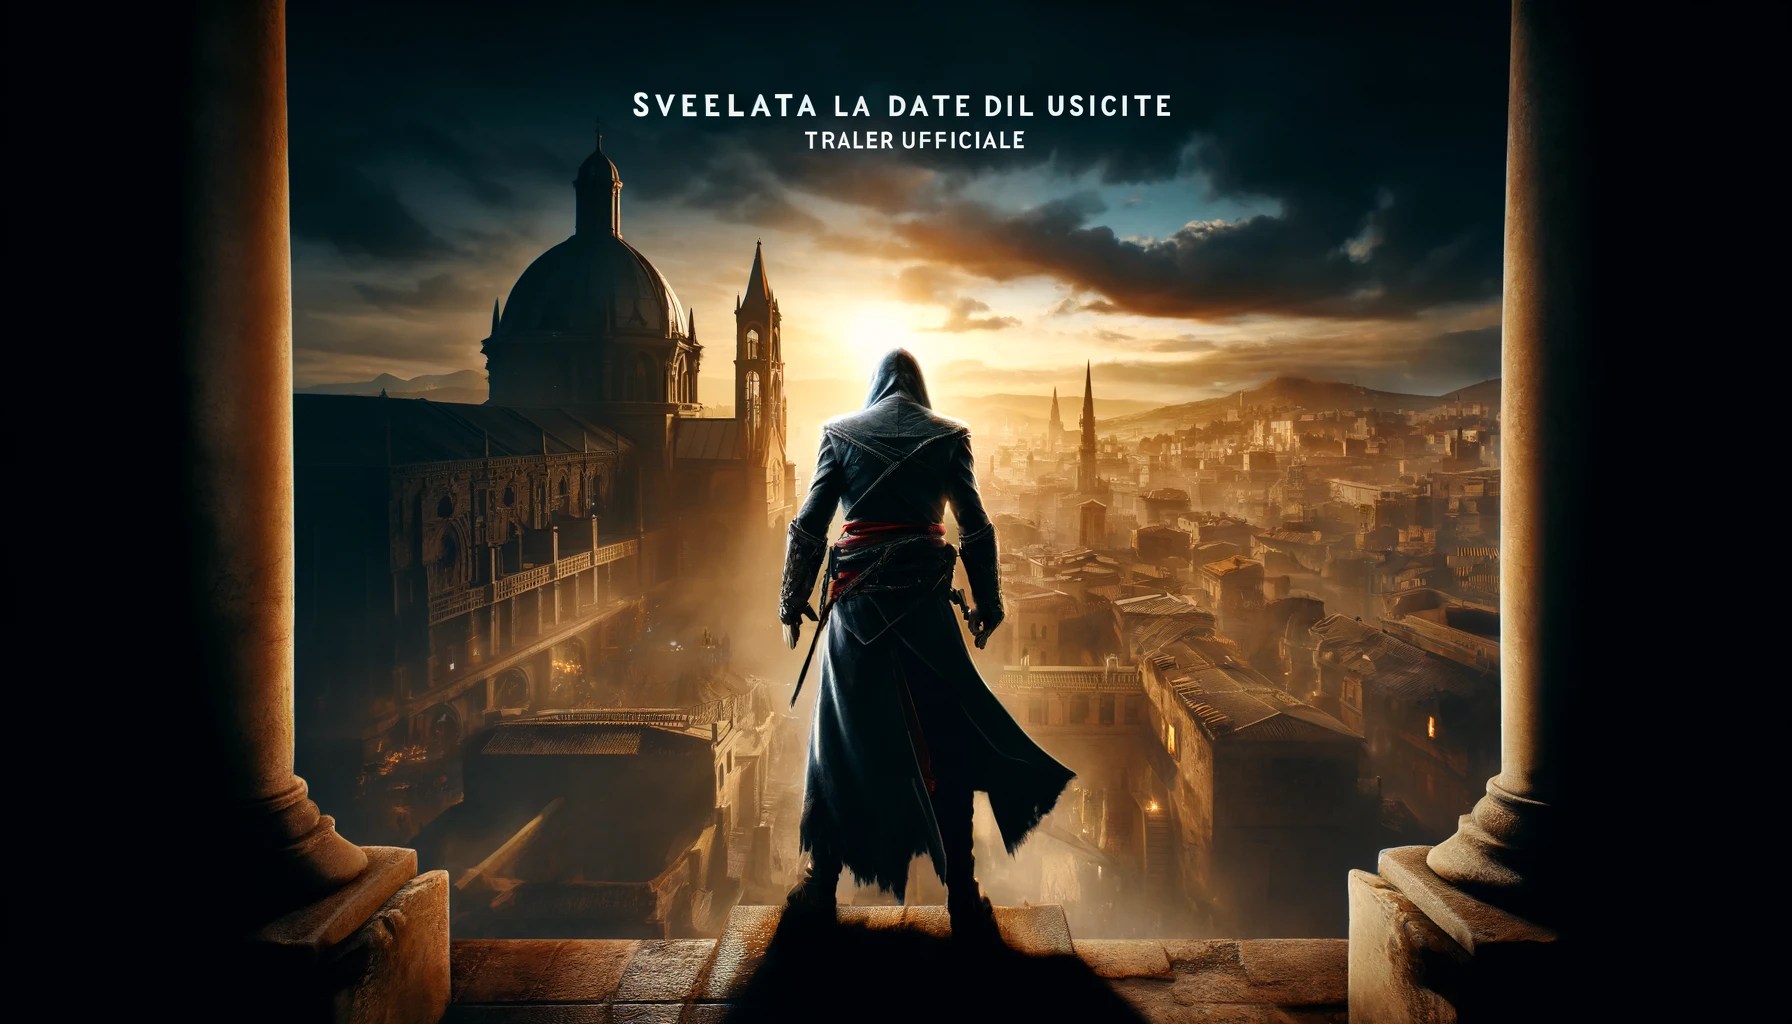 Assassin’s Creed Shadows: Official trailer release date revealed